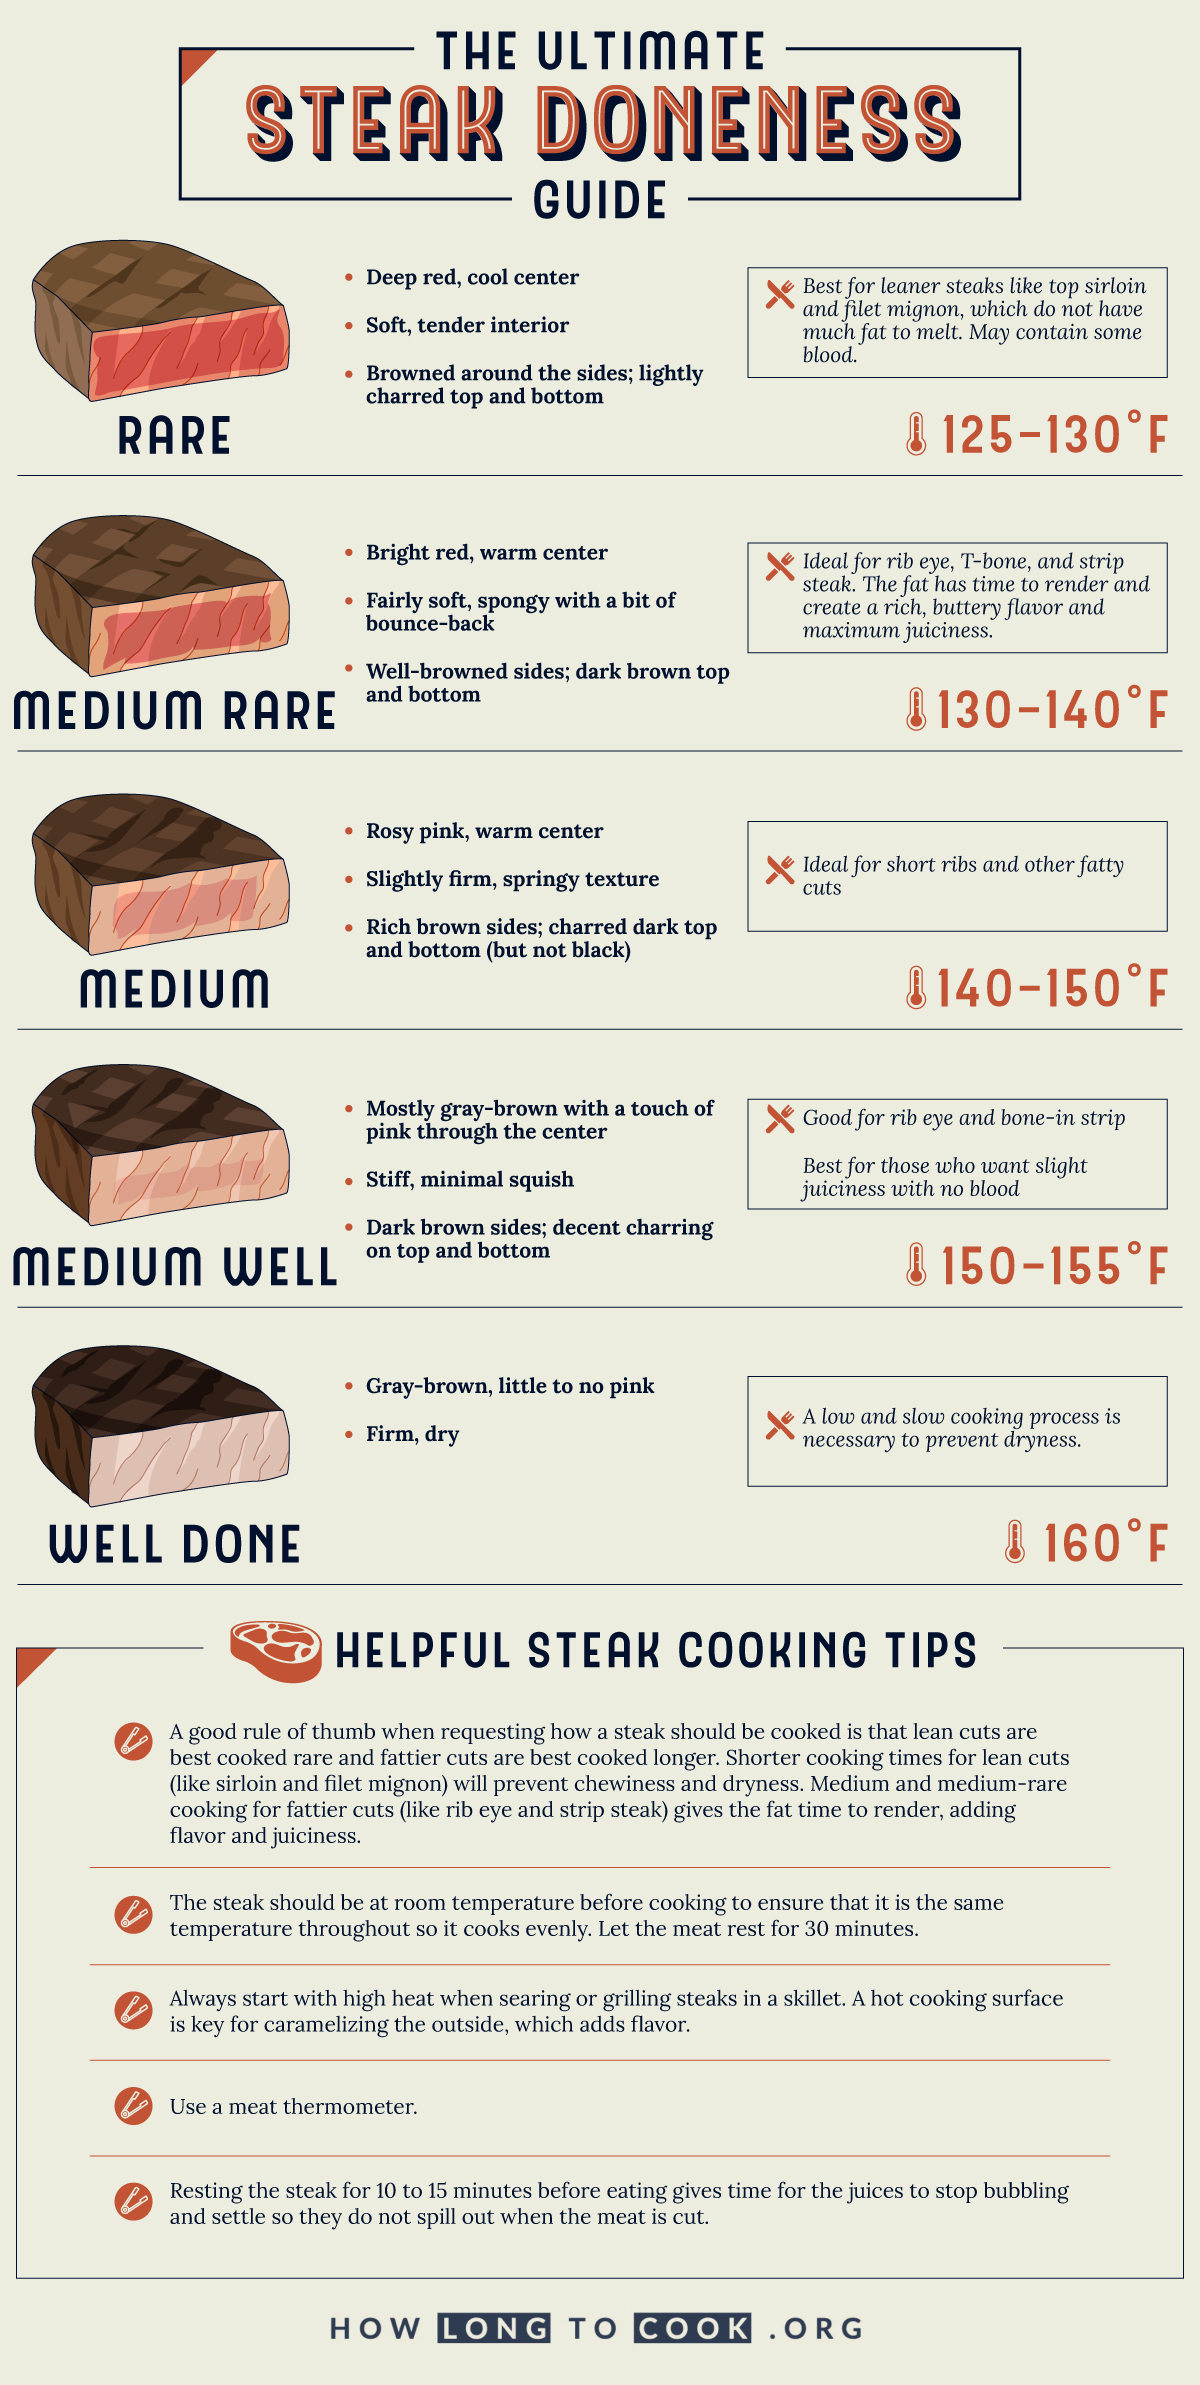 The Ultimate Steak Doneness Guide